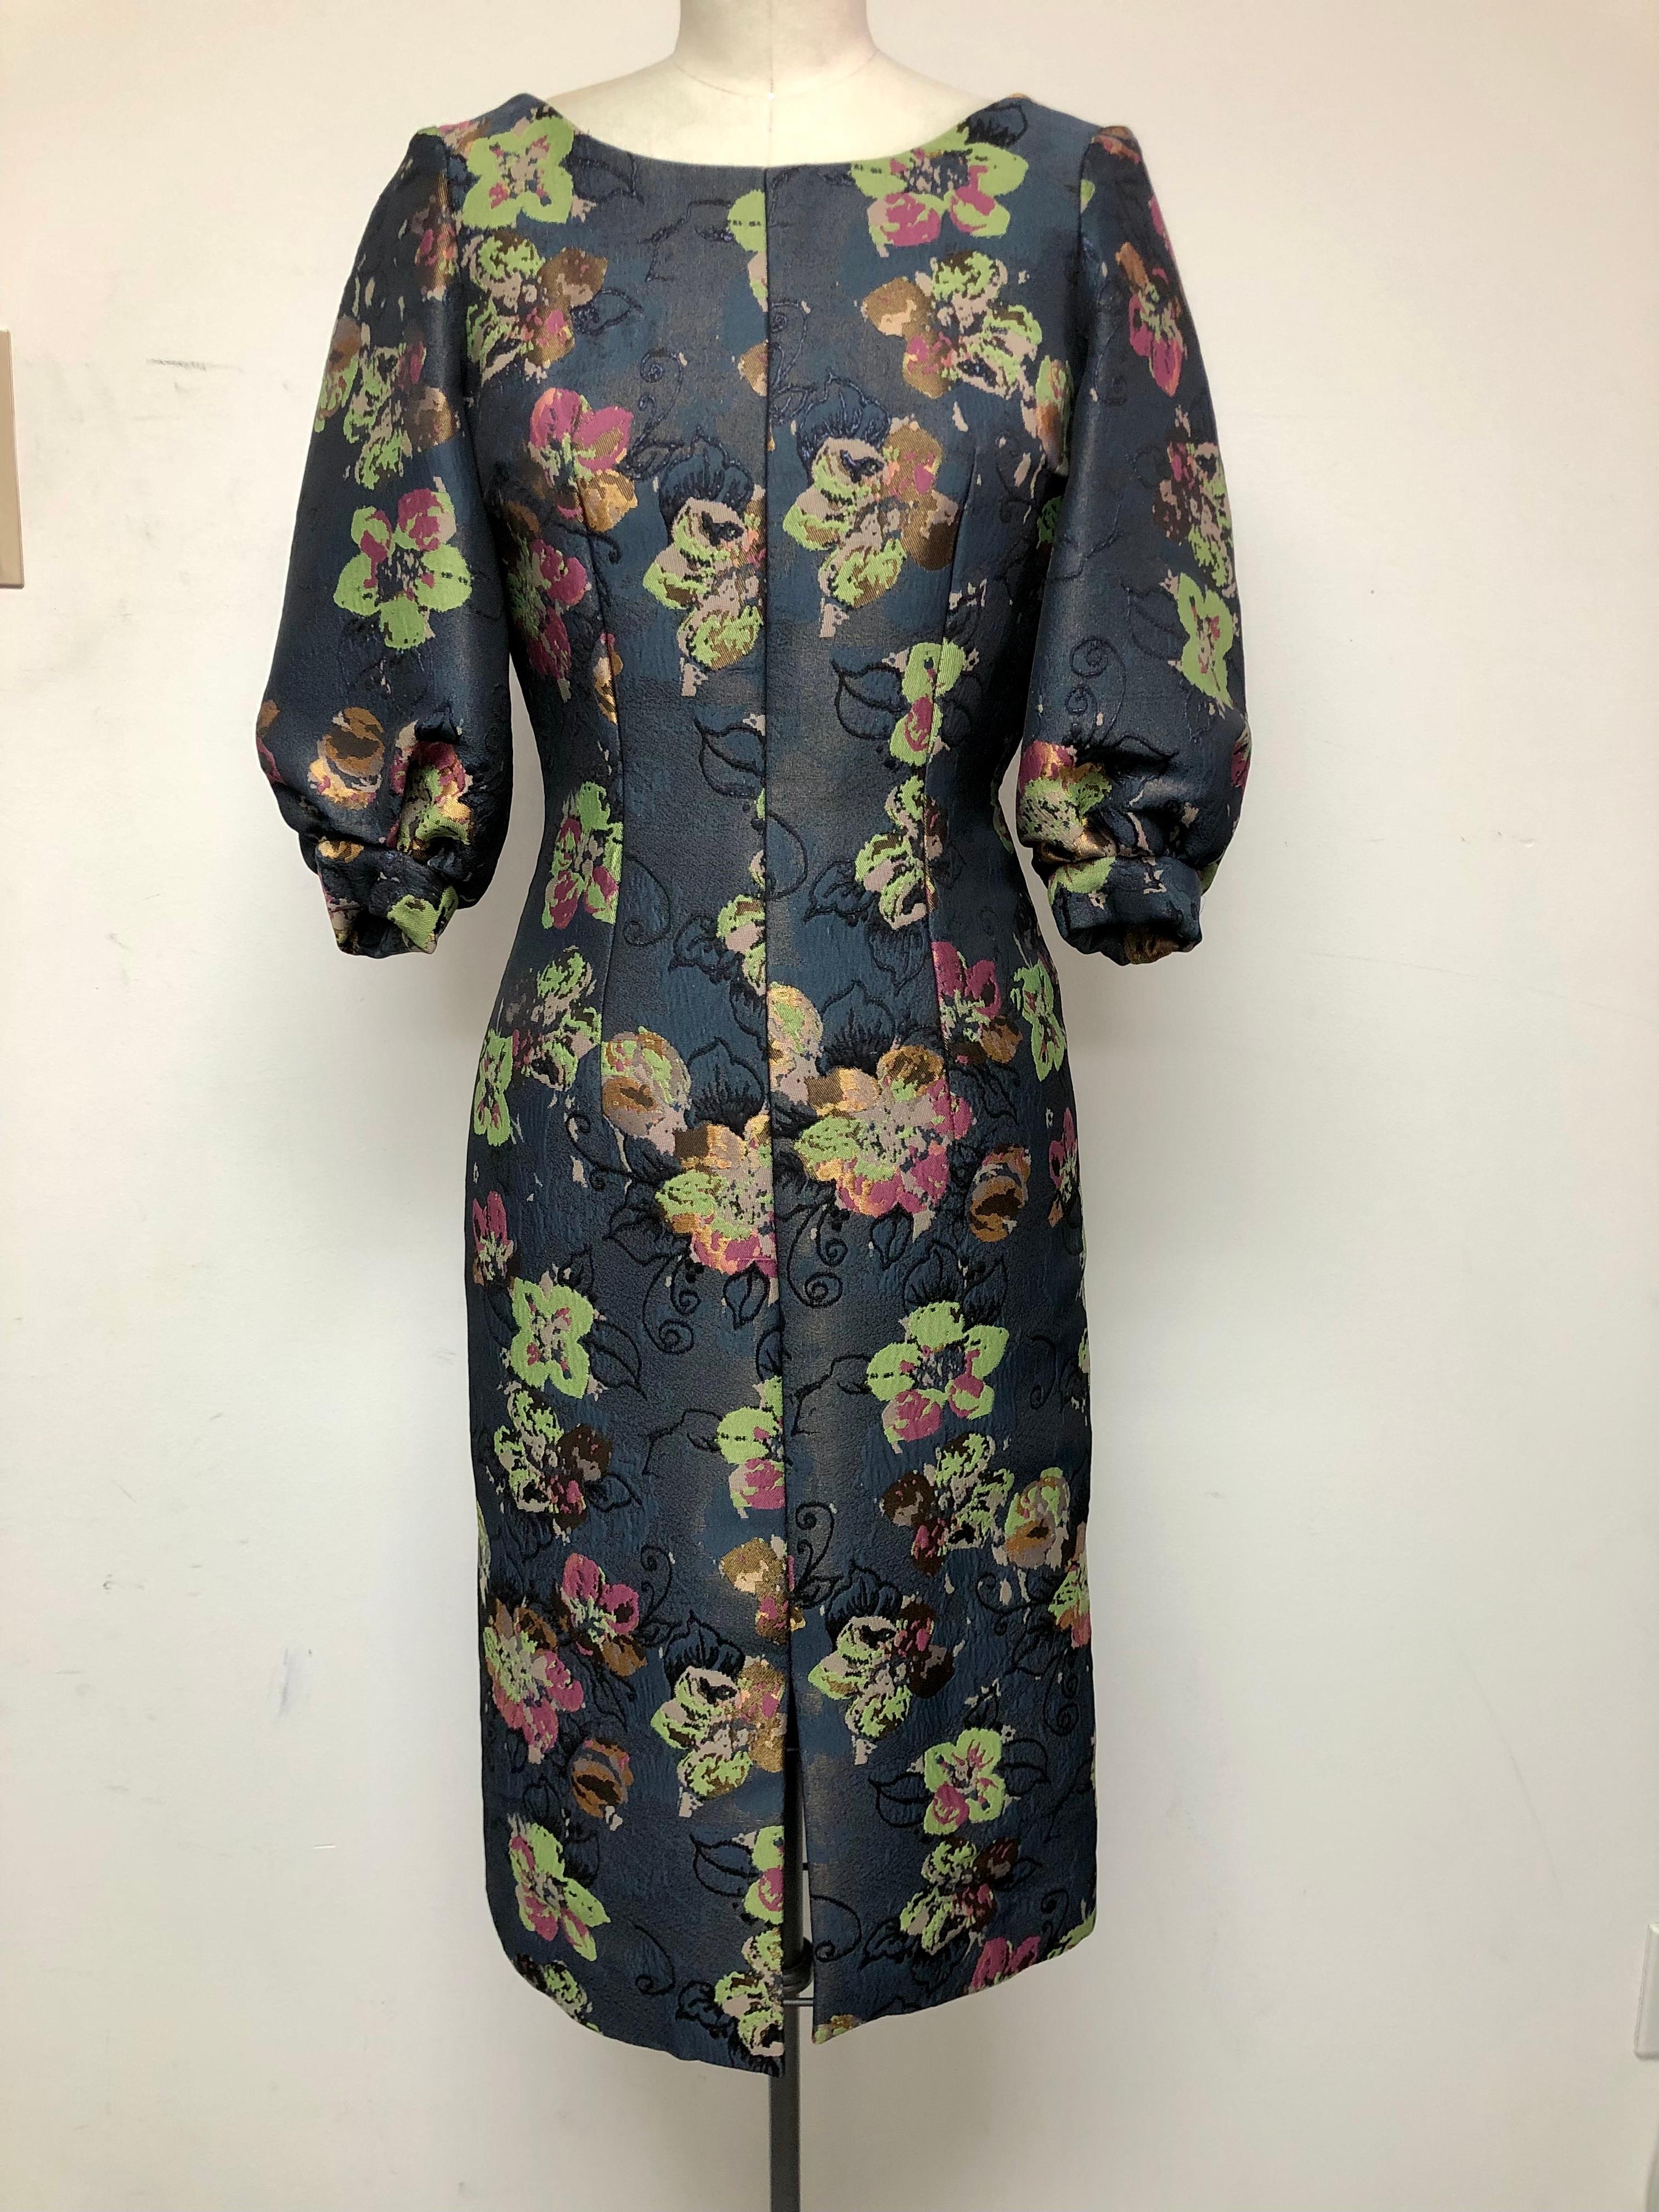 A timeless classic Slim Dress with Jewel Neck and Full Sleeve. A dress that goes perfectly from day into evening.
Unique abstract floral in autumnal colors on a light charcoal ground. Great for meetings, the office and dinner.
Can work for cocktails